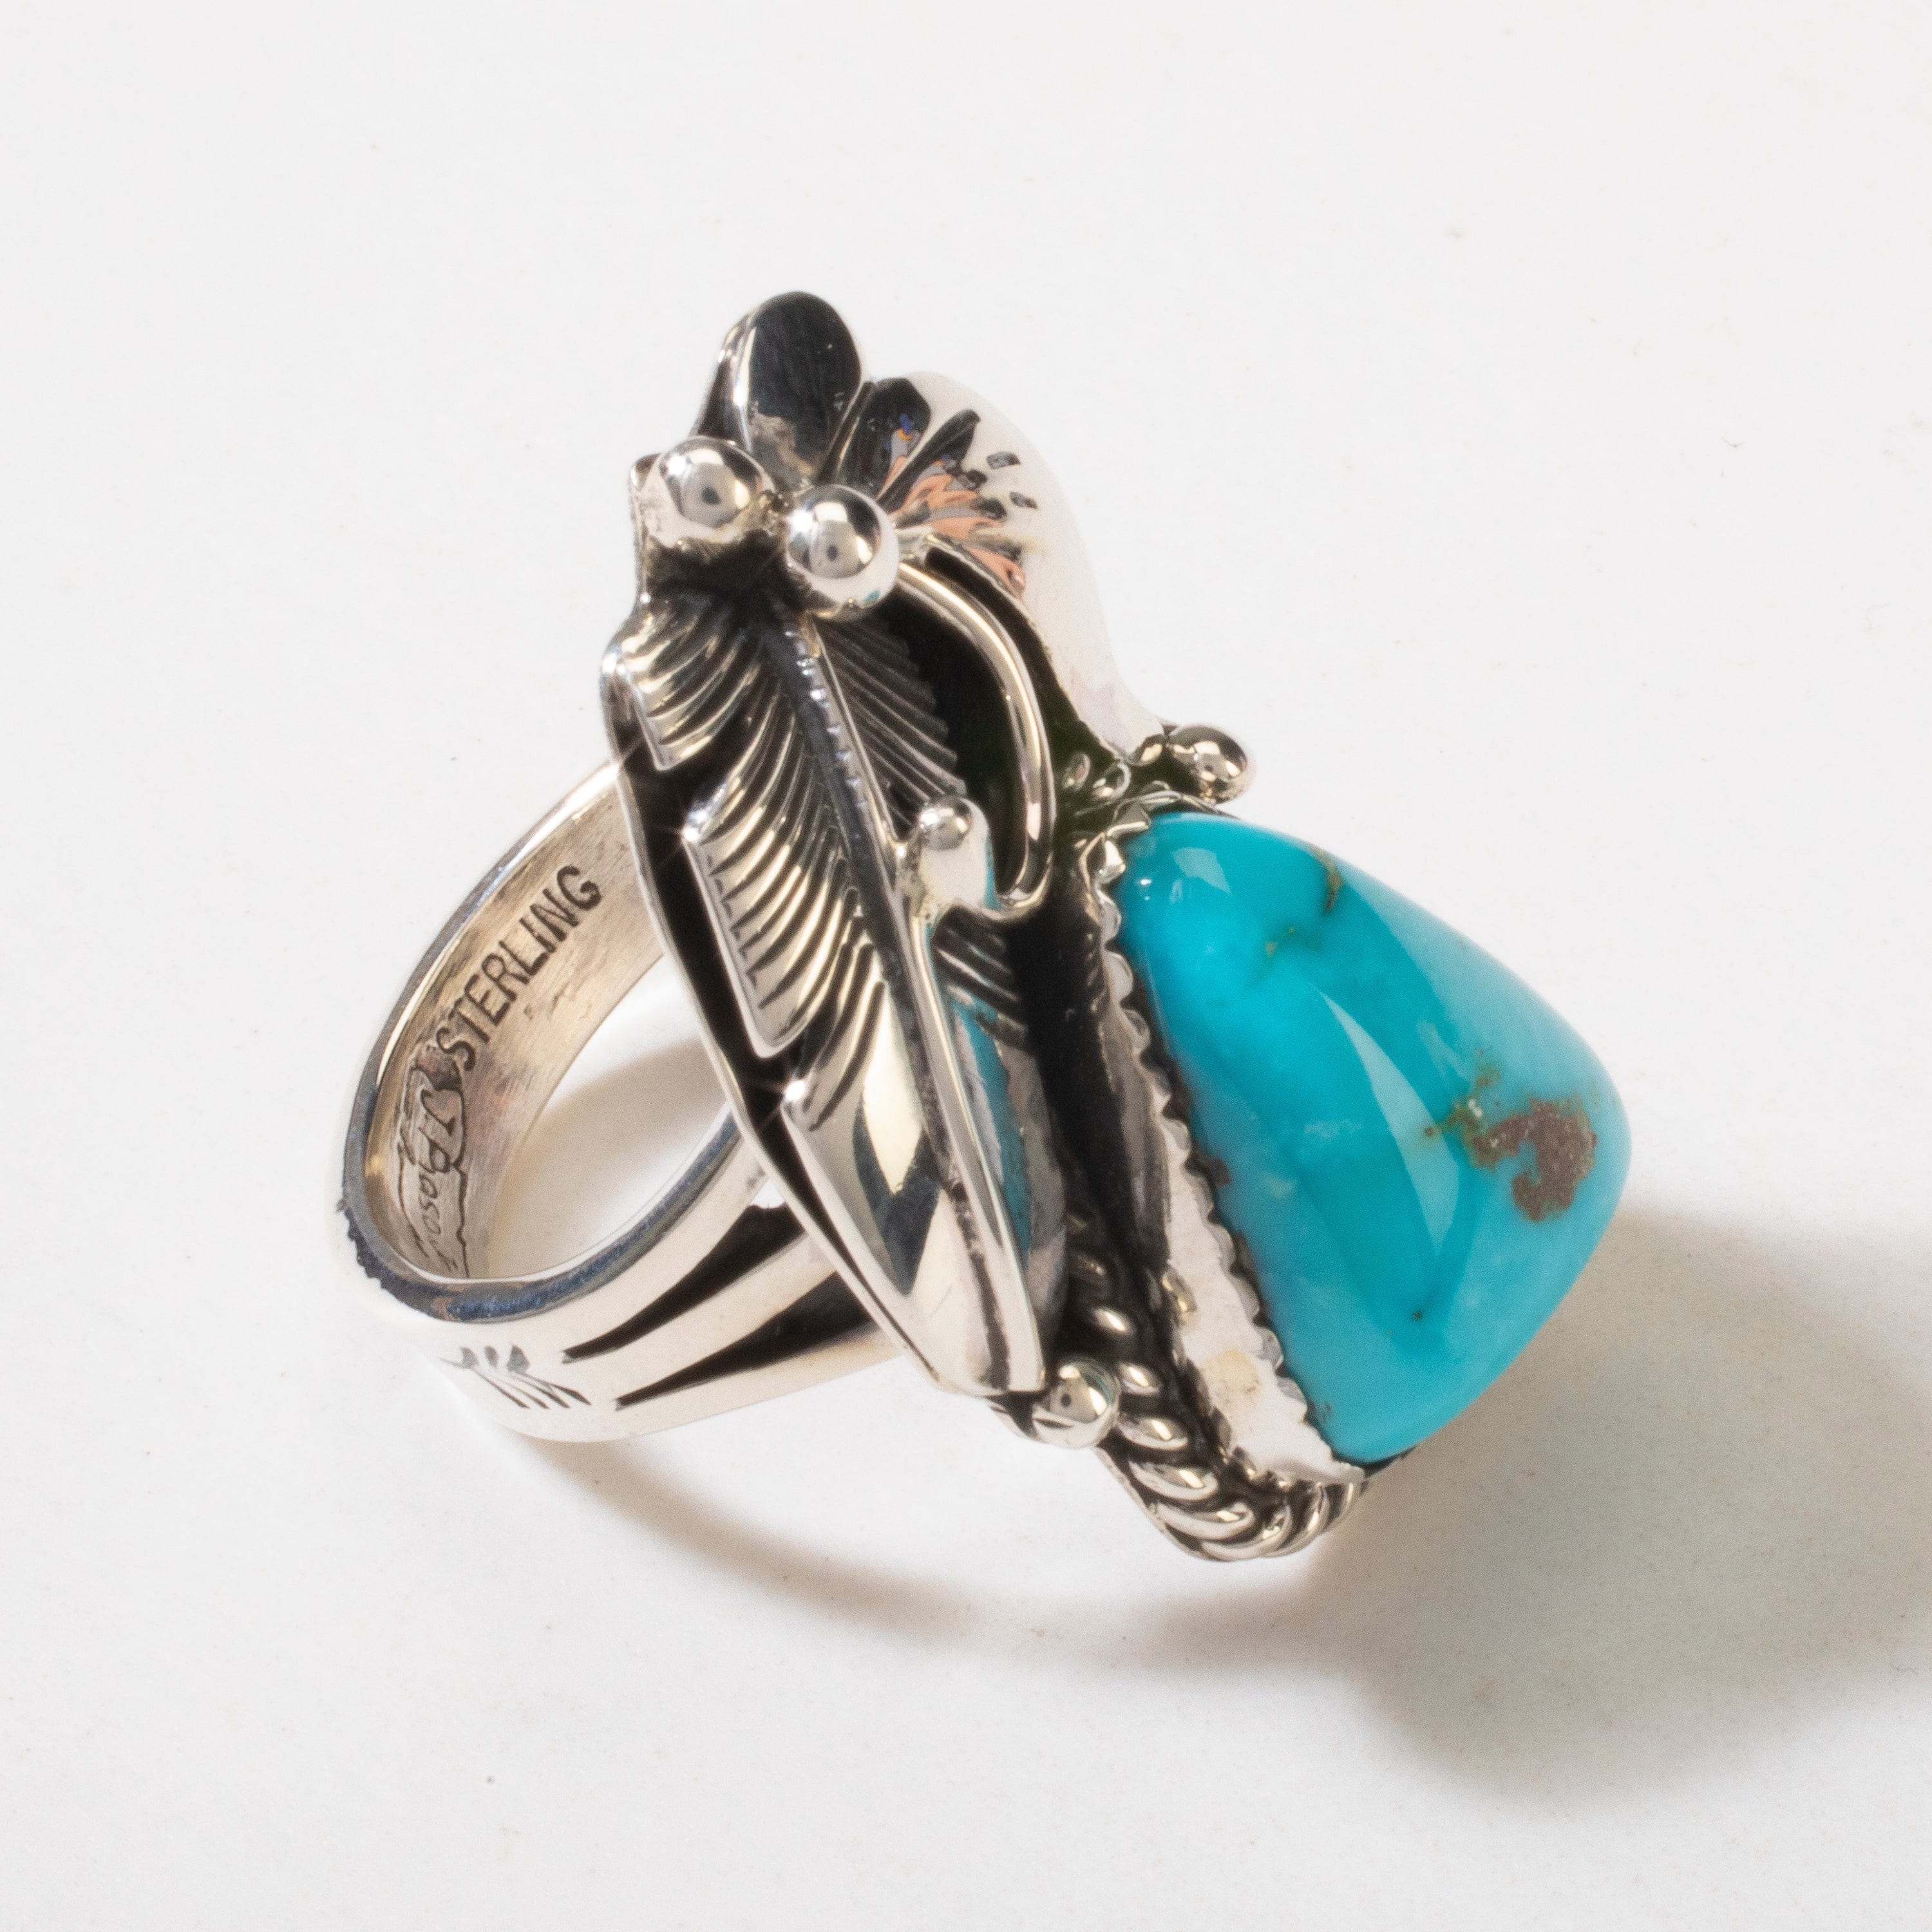 Kalifano Native American Jewelry 6 Joe Piaso Jr. Sleeping Beauty Turquoise Feather Navajo USA Native American Made 925 Sterling Silver Ring NAR600.051.6